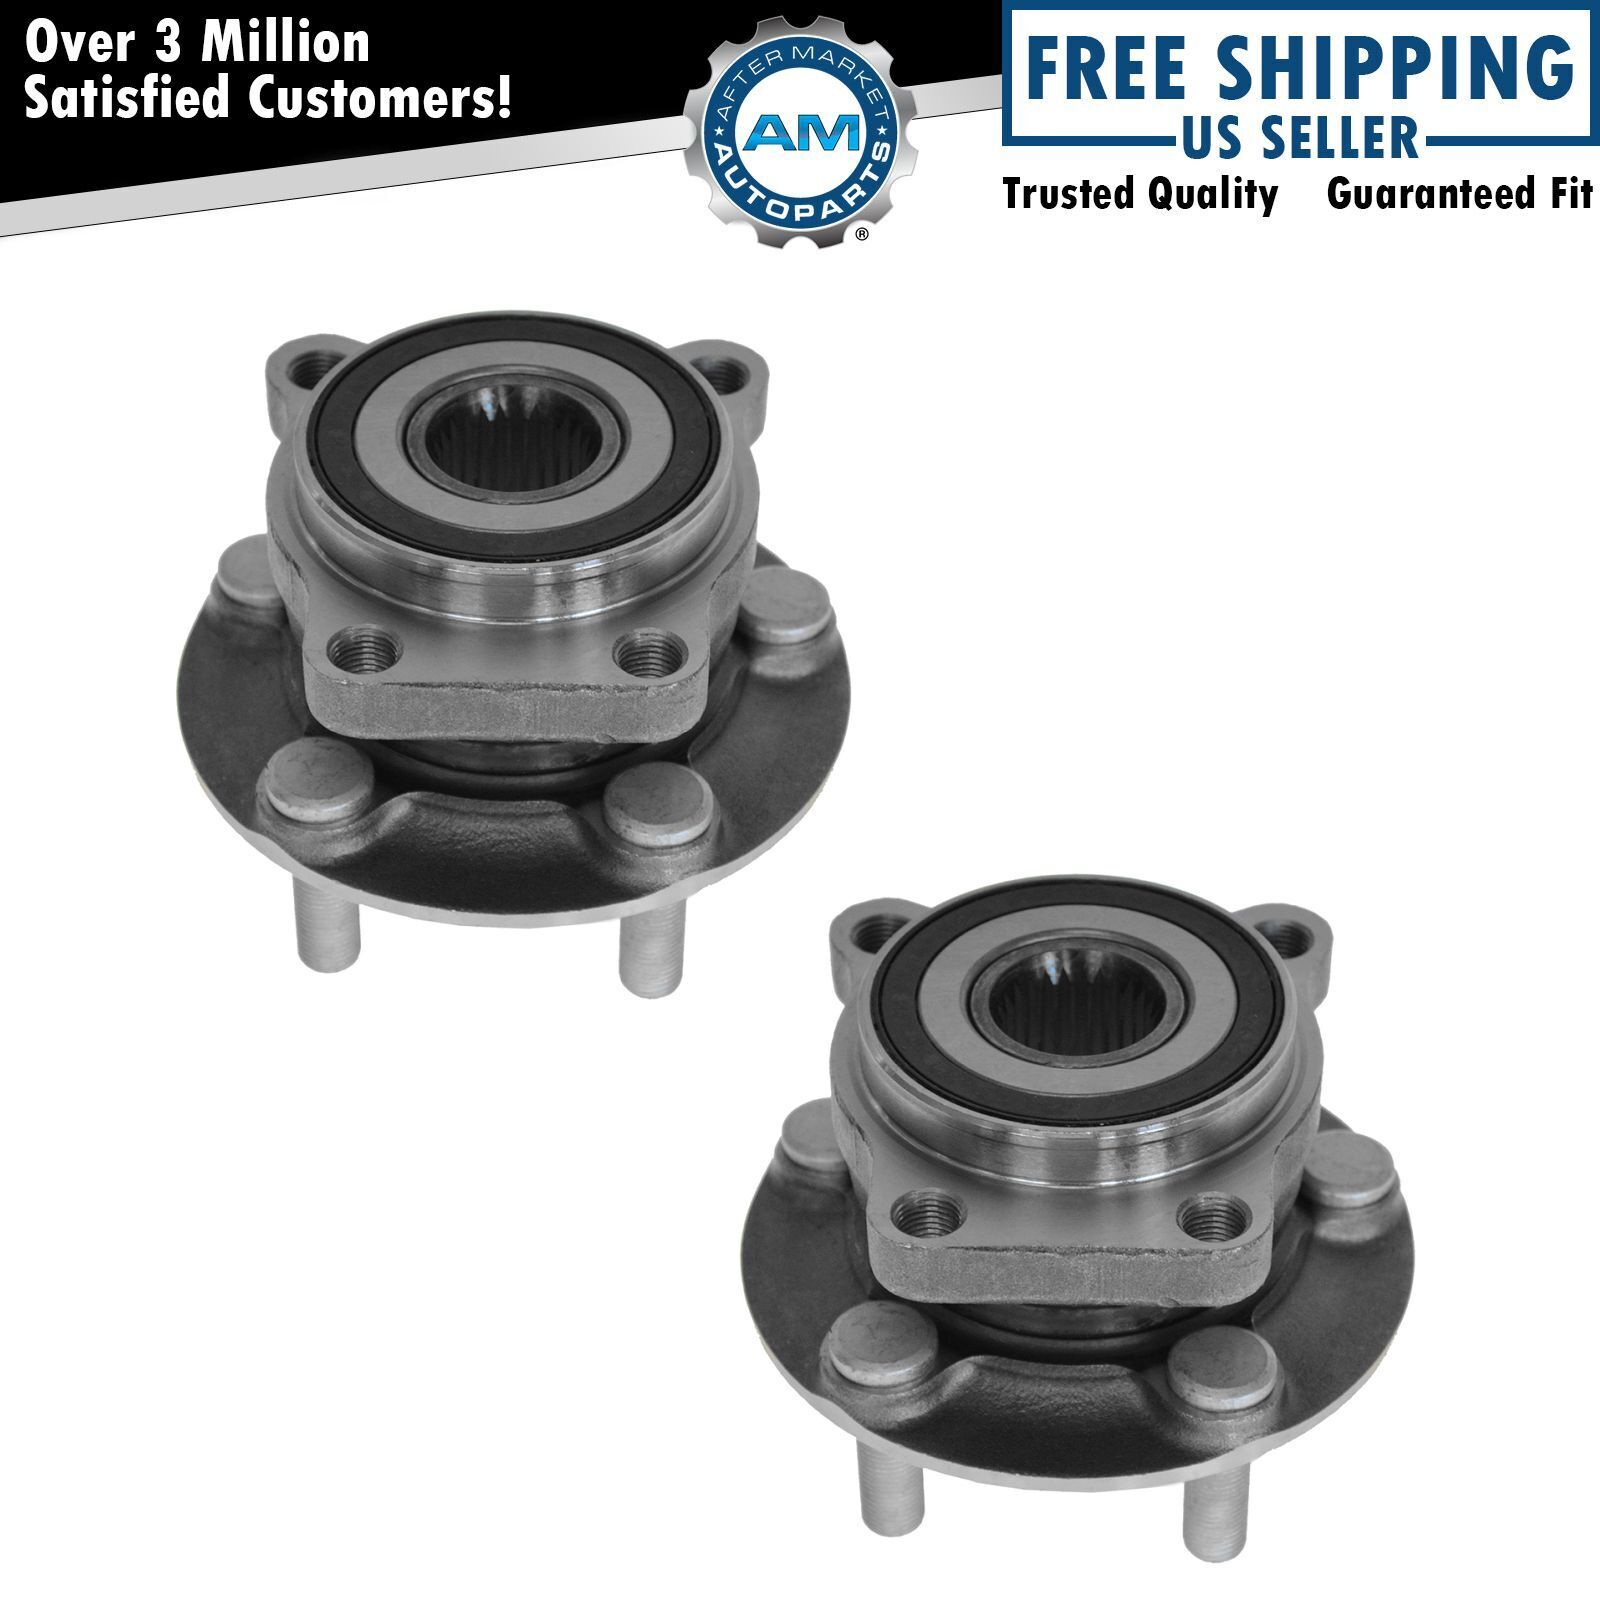 Pair Front Wheel Hub Bearing Assembly for Subaru Impreza Forester Legacy Outback